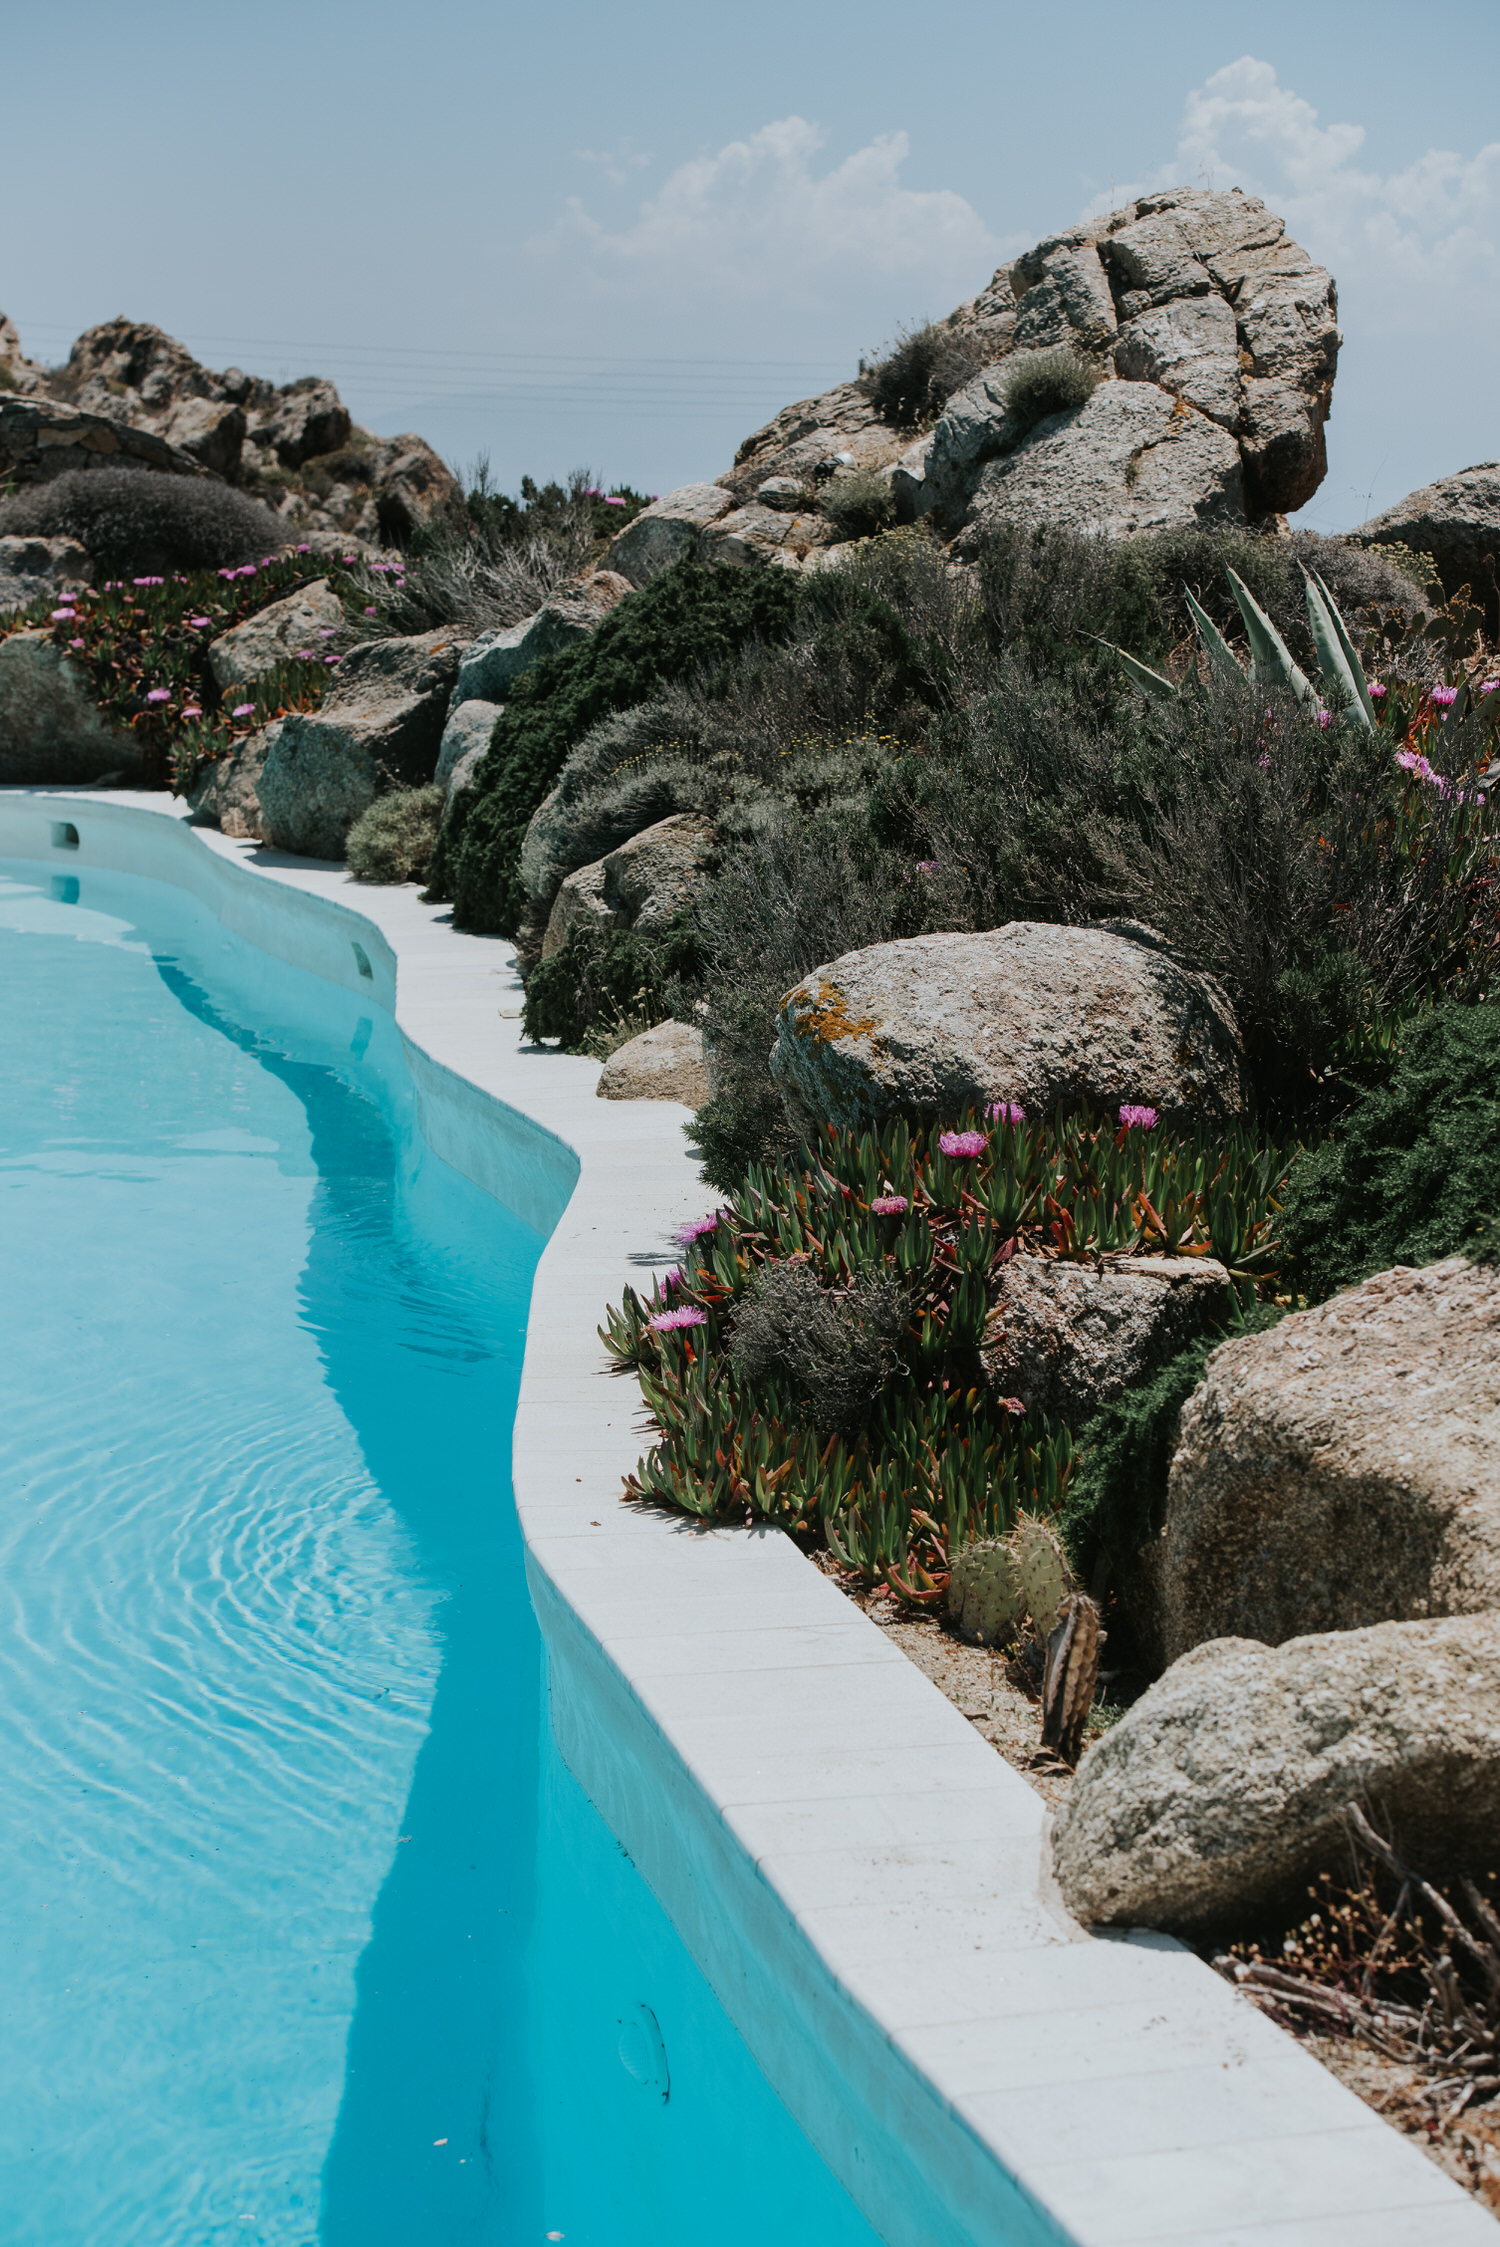 Mykonos wedding photographer: turquoise pool water surrounded by Mykonian rocks and wild herbs.